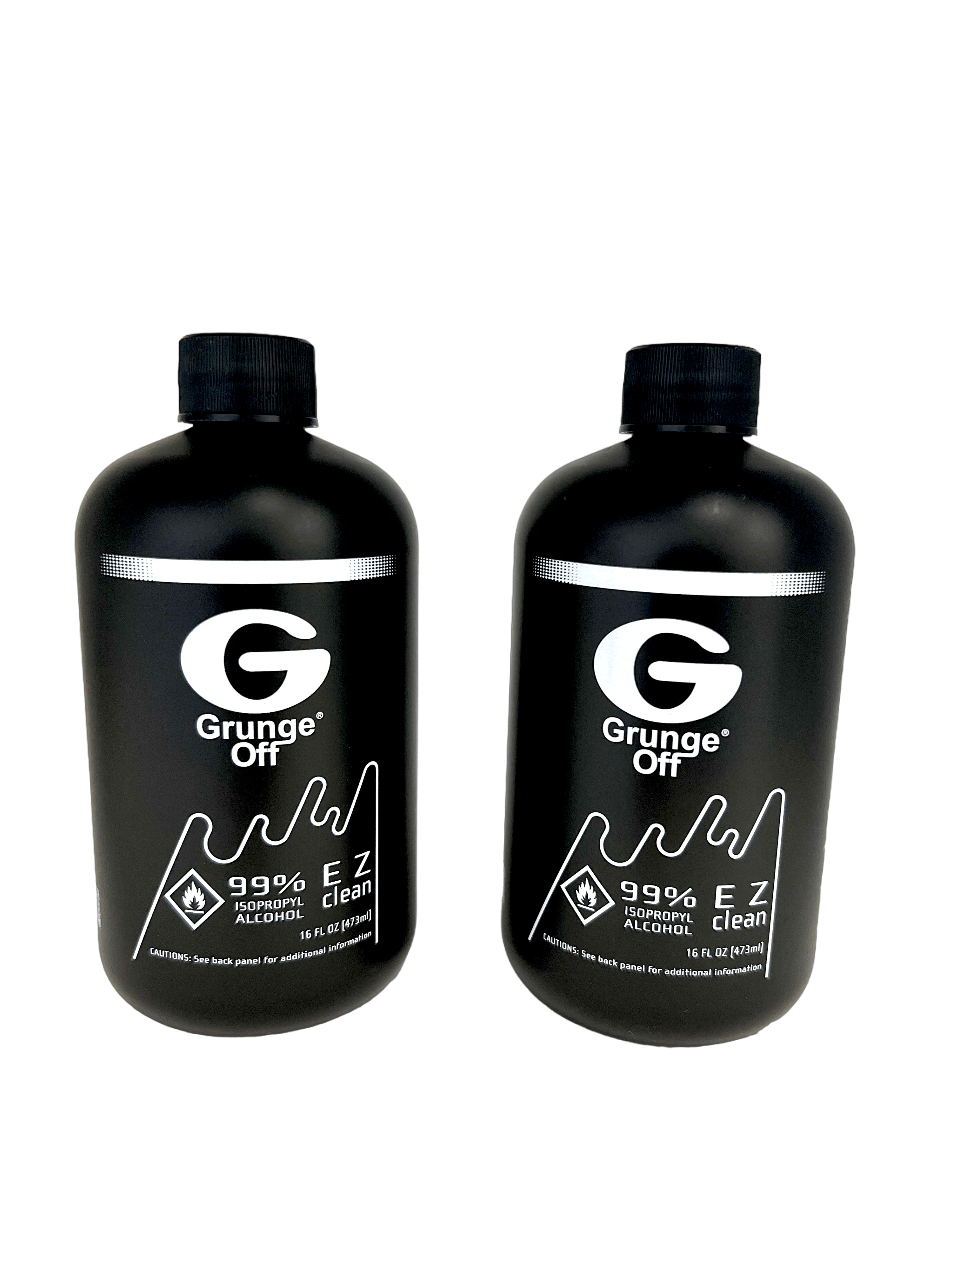 Grunge Off 99% Isopropyl Alcohol, 16oz | Third Party Brands | 420 Science